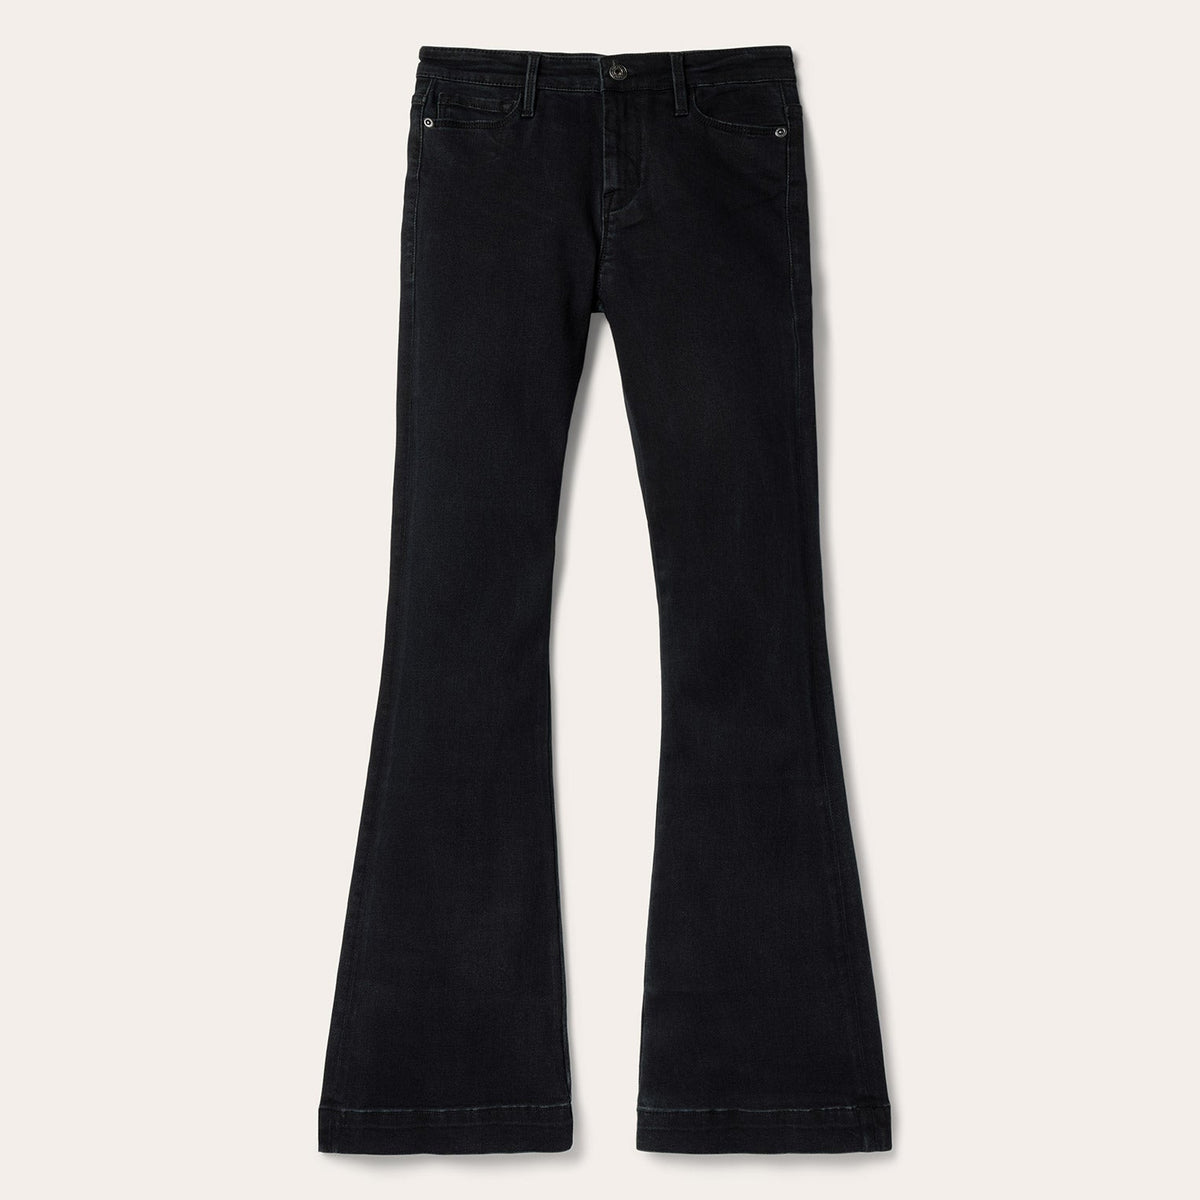 Stetson 921 High Rise Flare Jeans